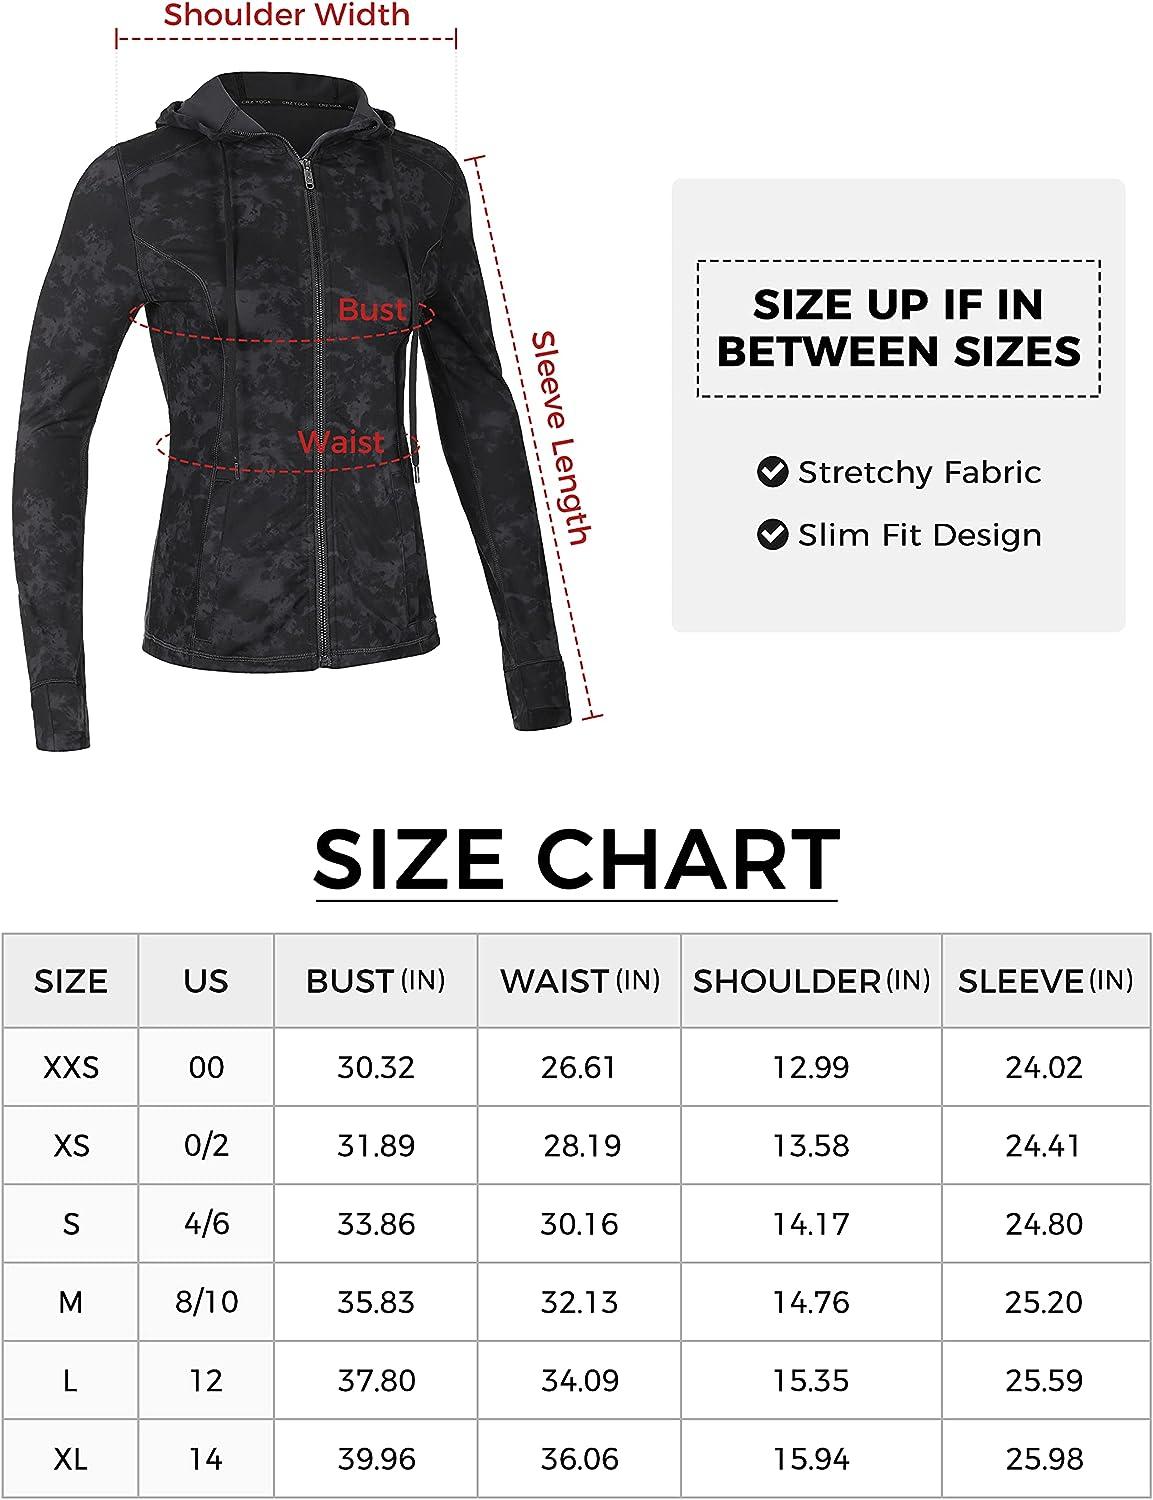 Fall in love with these Butterluxe Waist-Length Full Zip Jackets